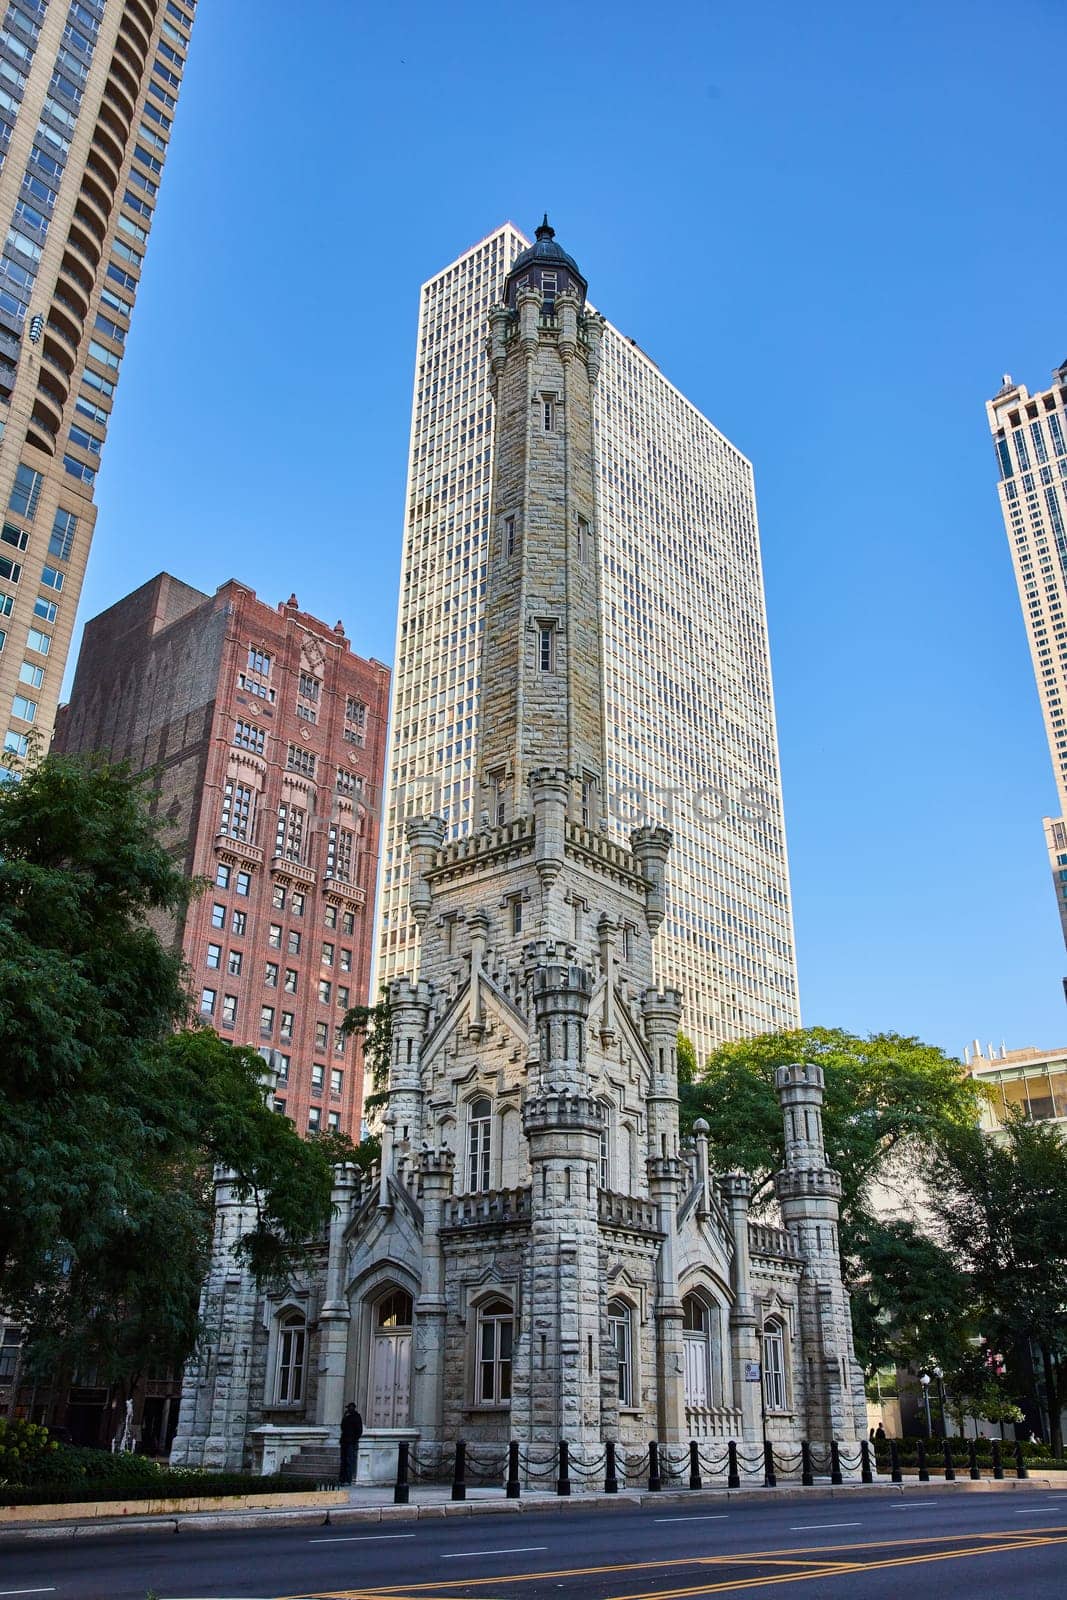 Image of Old, historic, original Chicago water tower with castle architecture under blue sky amid skyscrapers